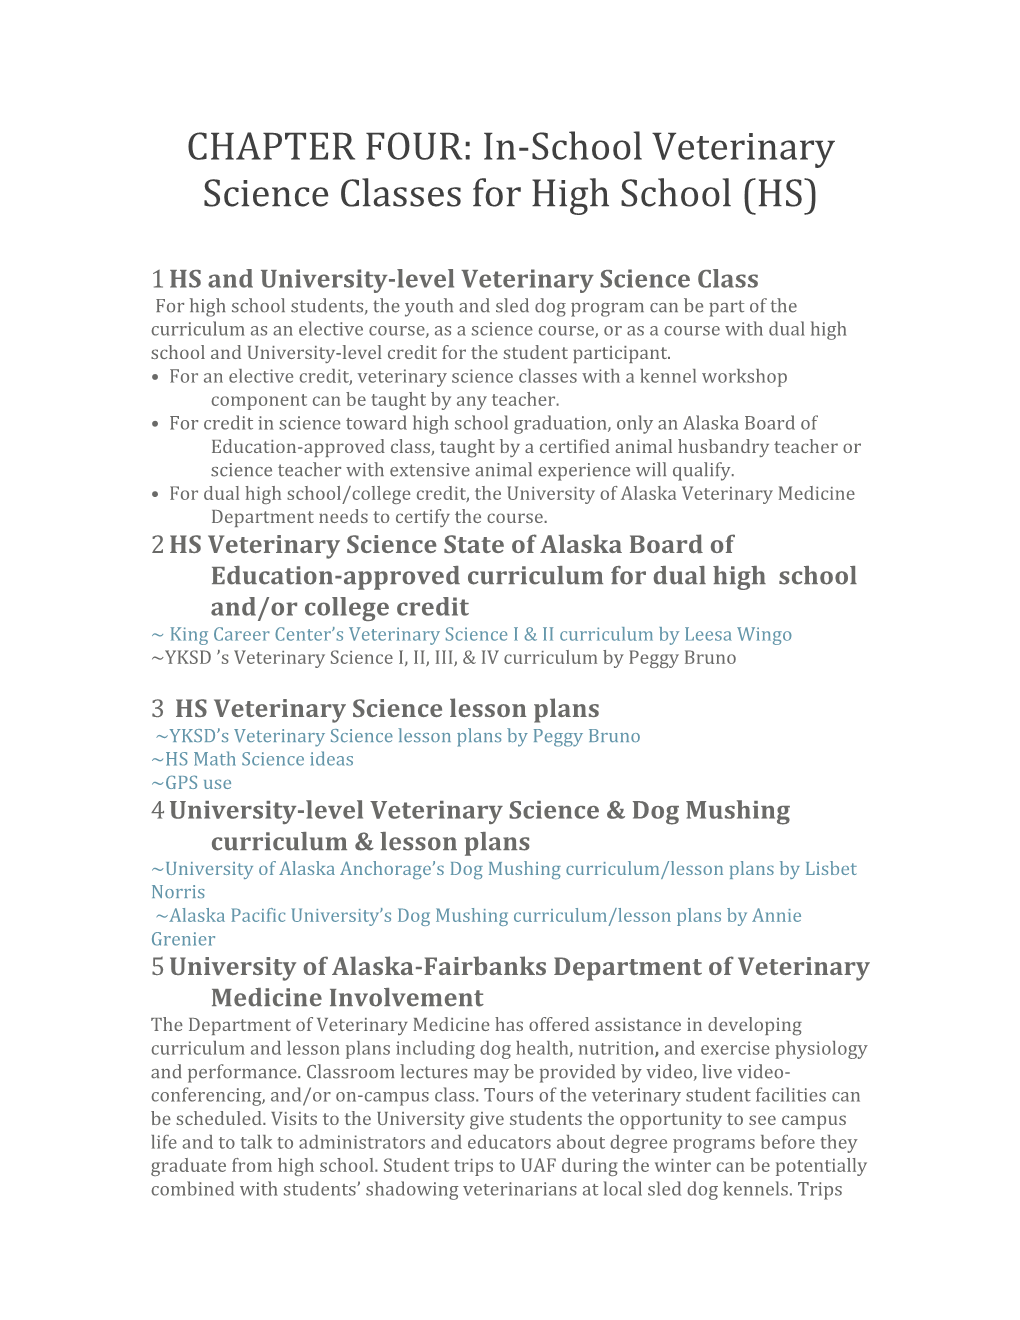 CHAPTER FOUR: In-School Veterinary Science Classes for High School (HS)